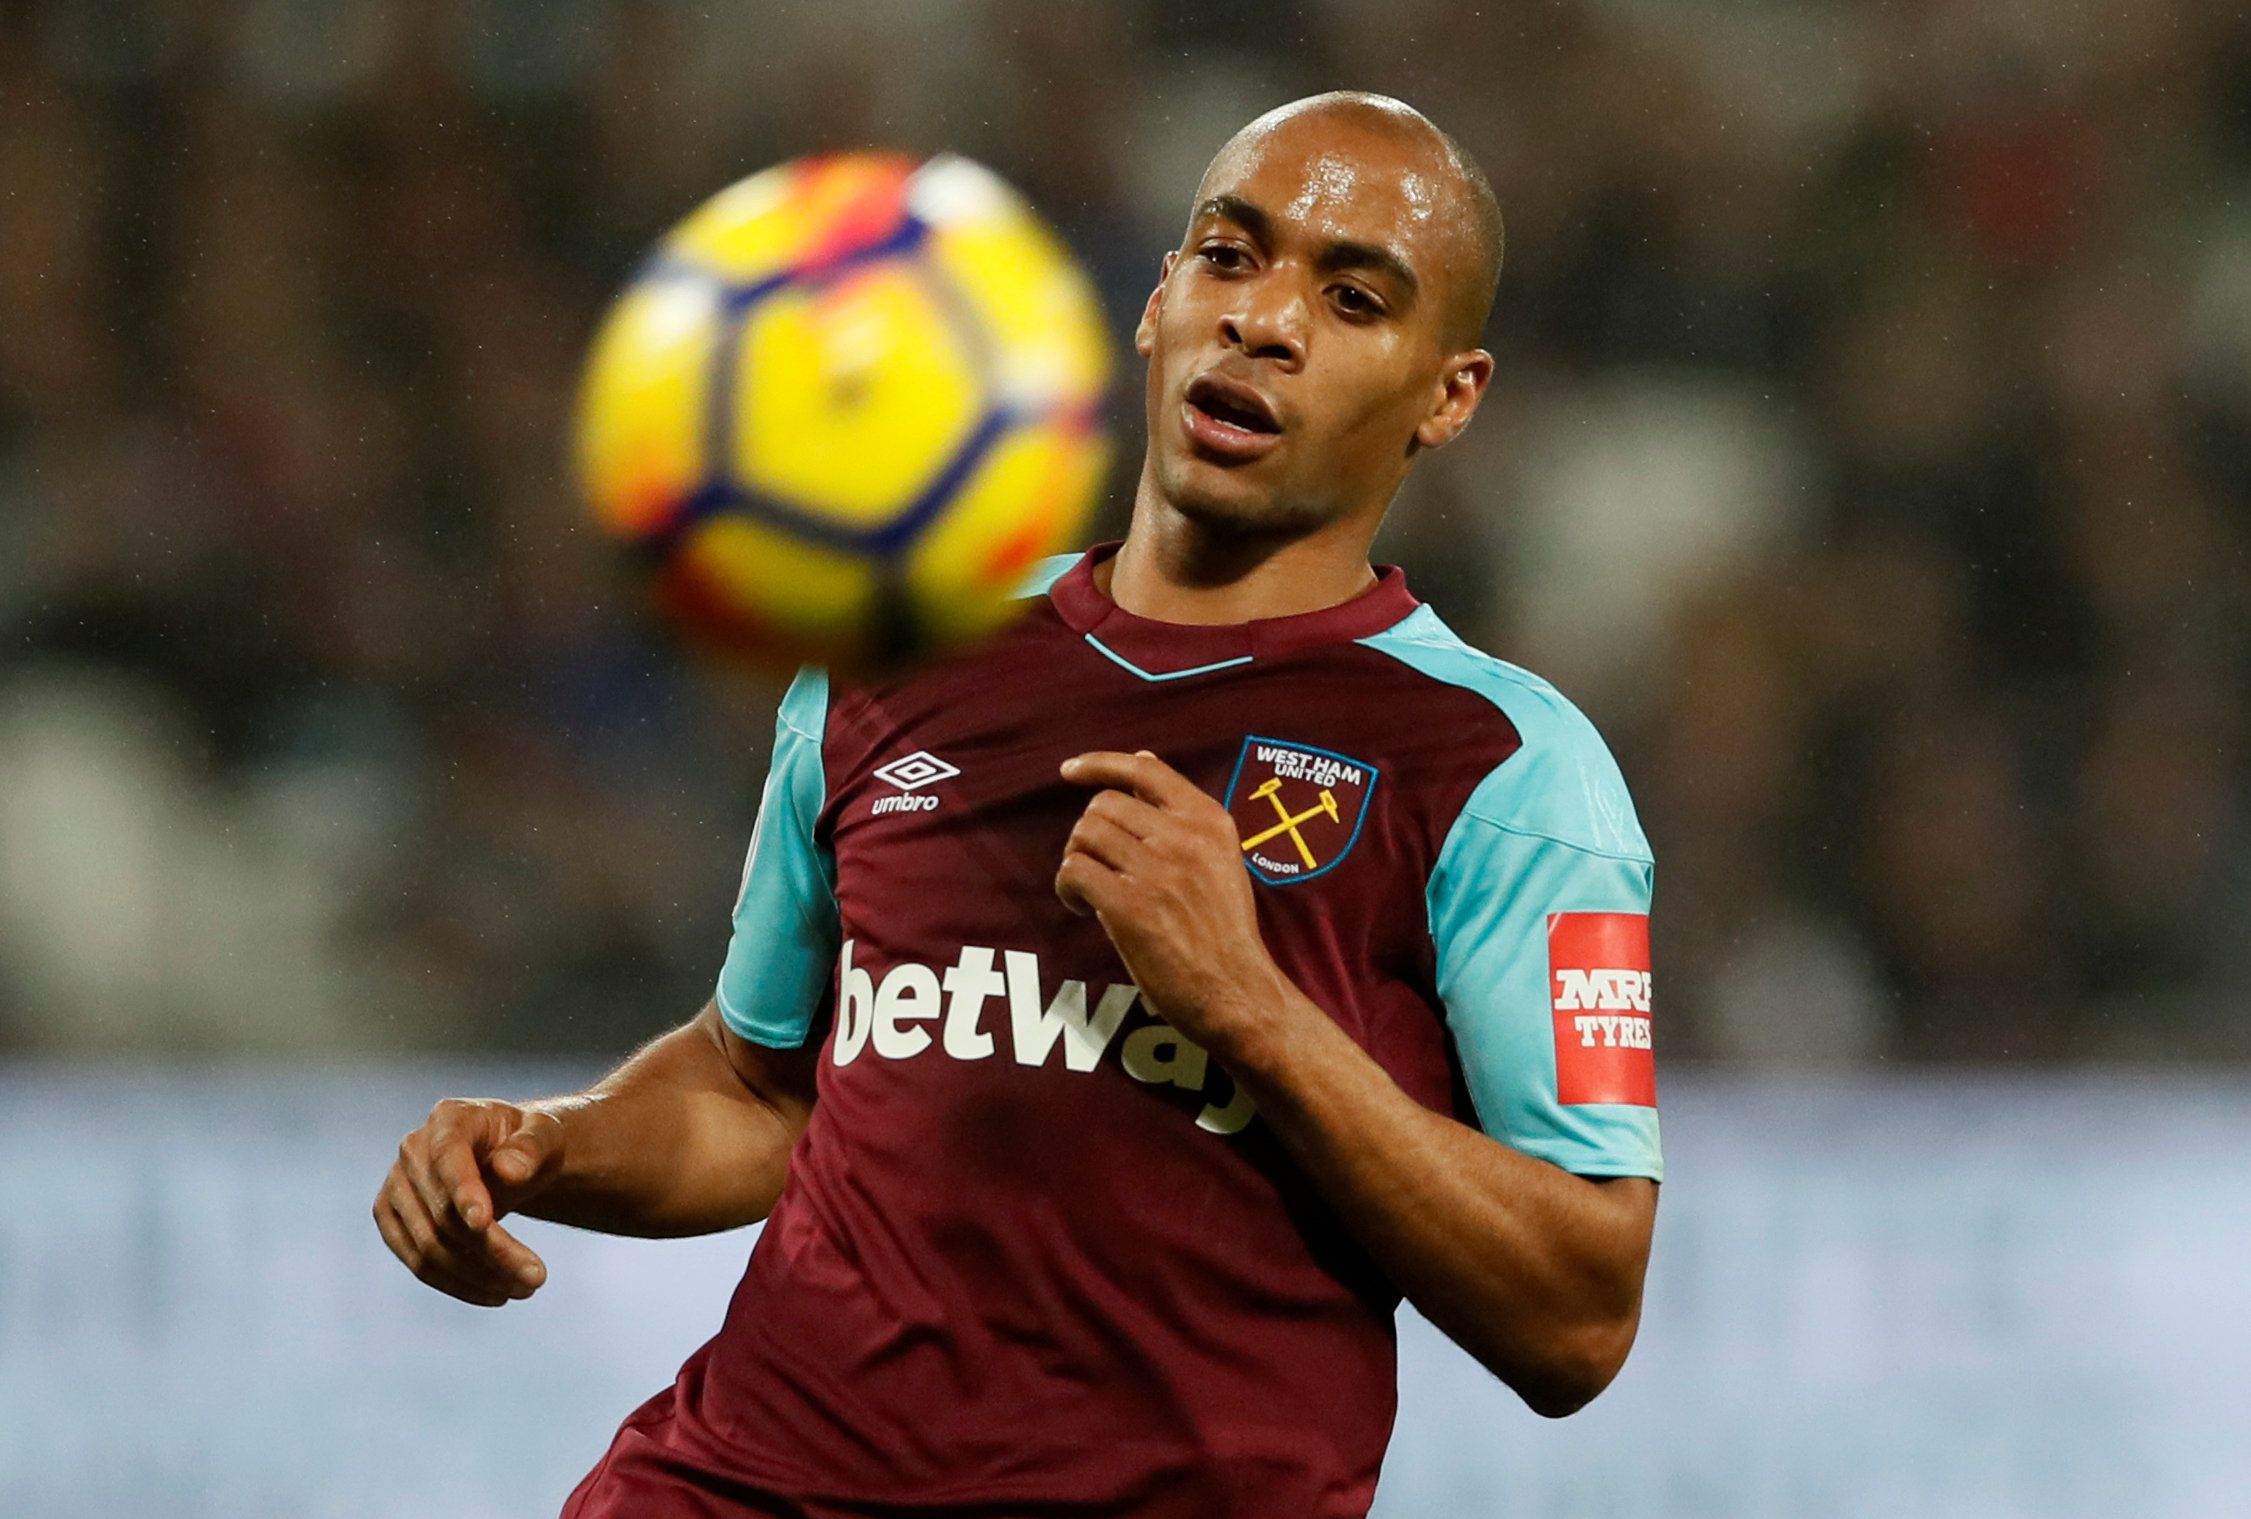 Soccer Football - Premier League - West Ham United vs Crystal Palace - London Stadium, London, Britain - January 30, 2018   West Ham United’s Joao Mario in action   REUTERS/David Klein    EDITORIAL USE ONLY. No use with unauthorized audio, video, data, fixture lists, club/league logos or 